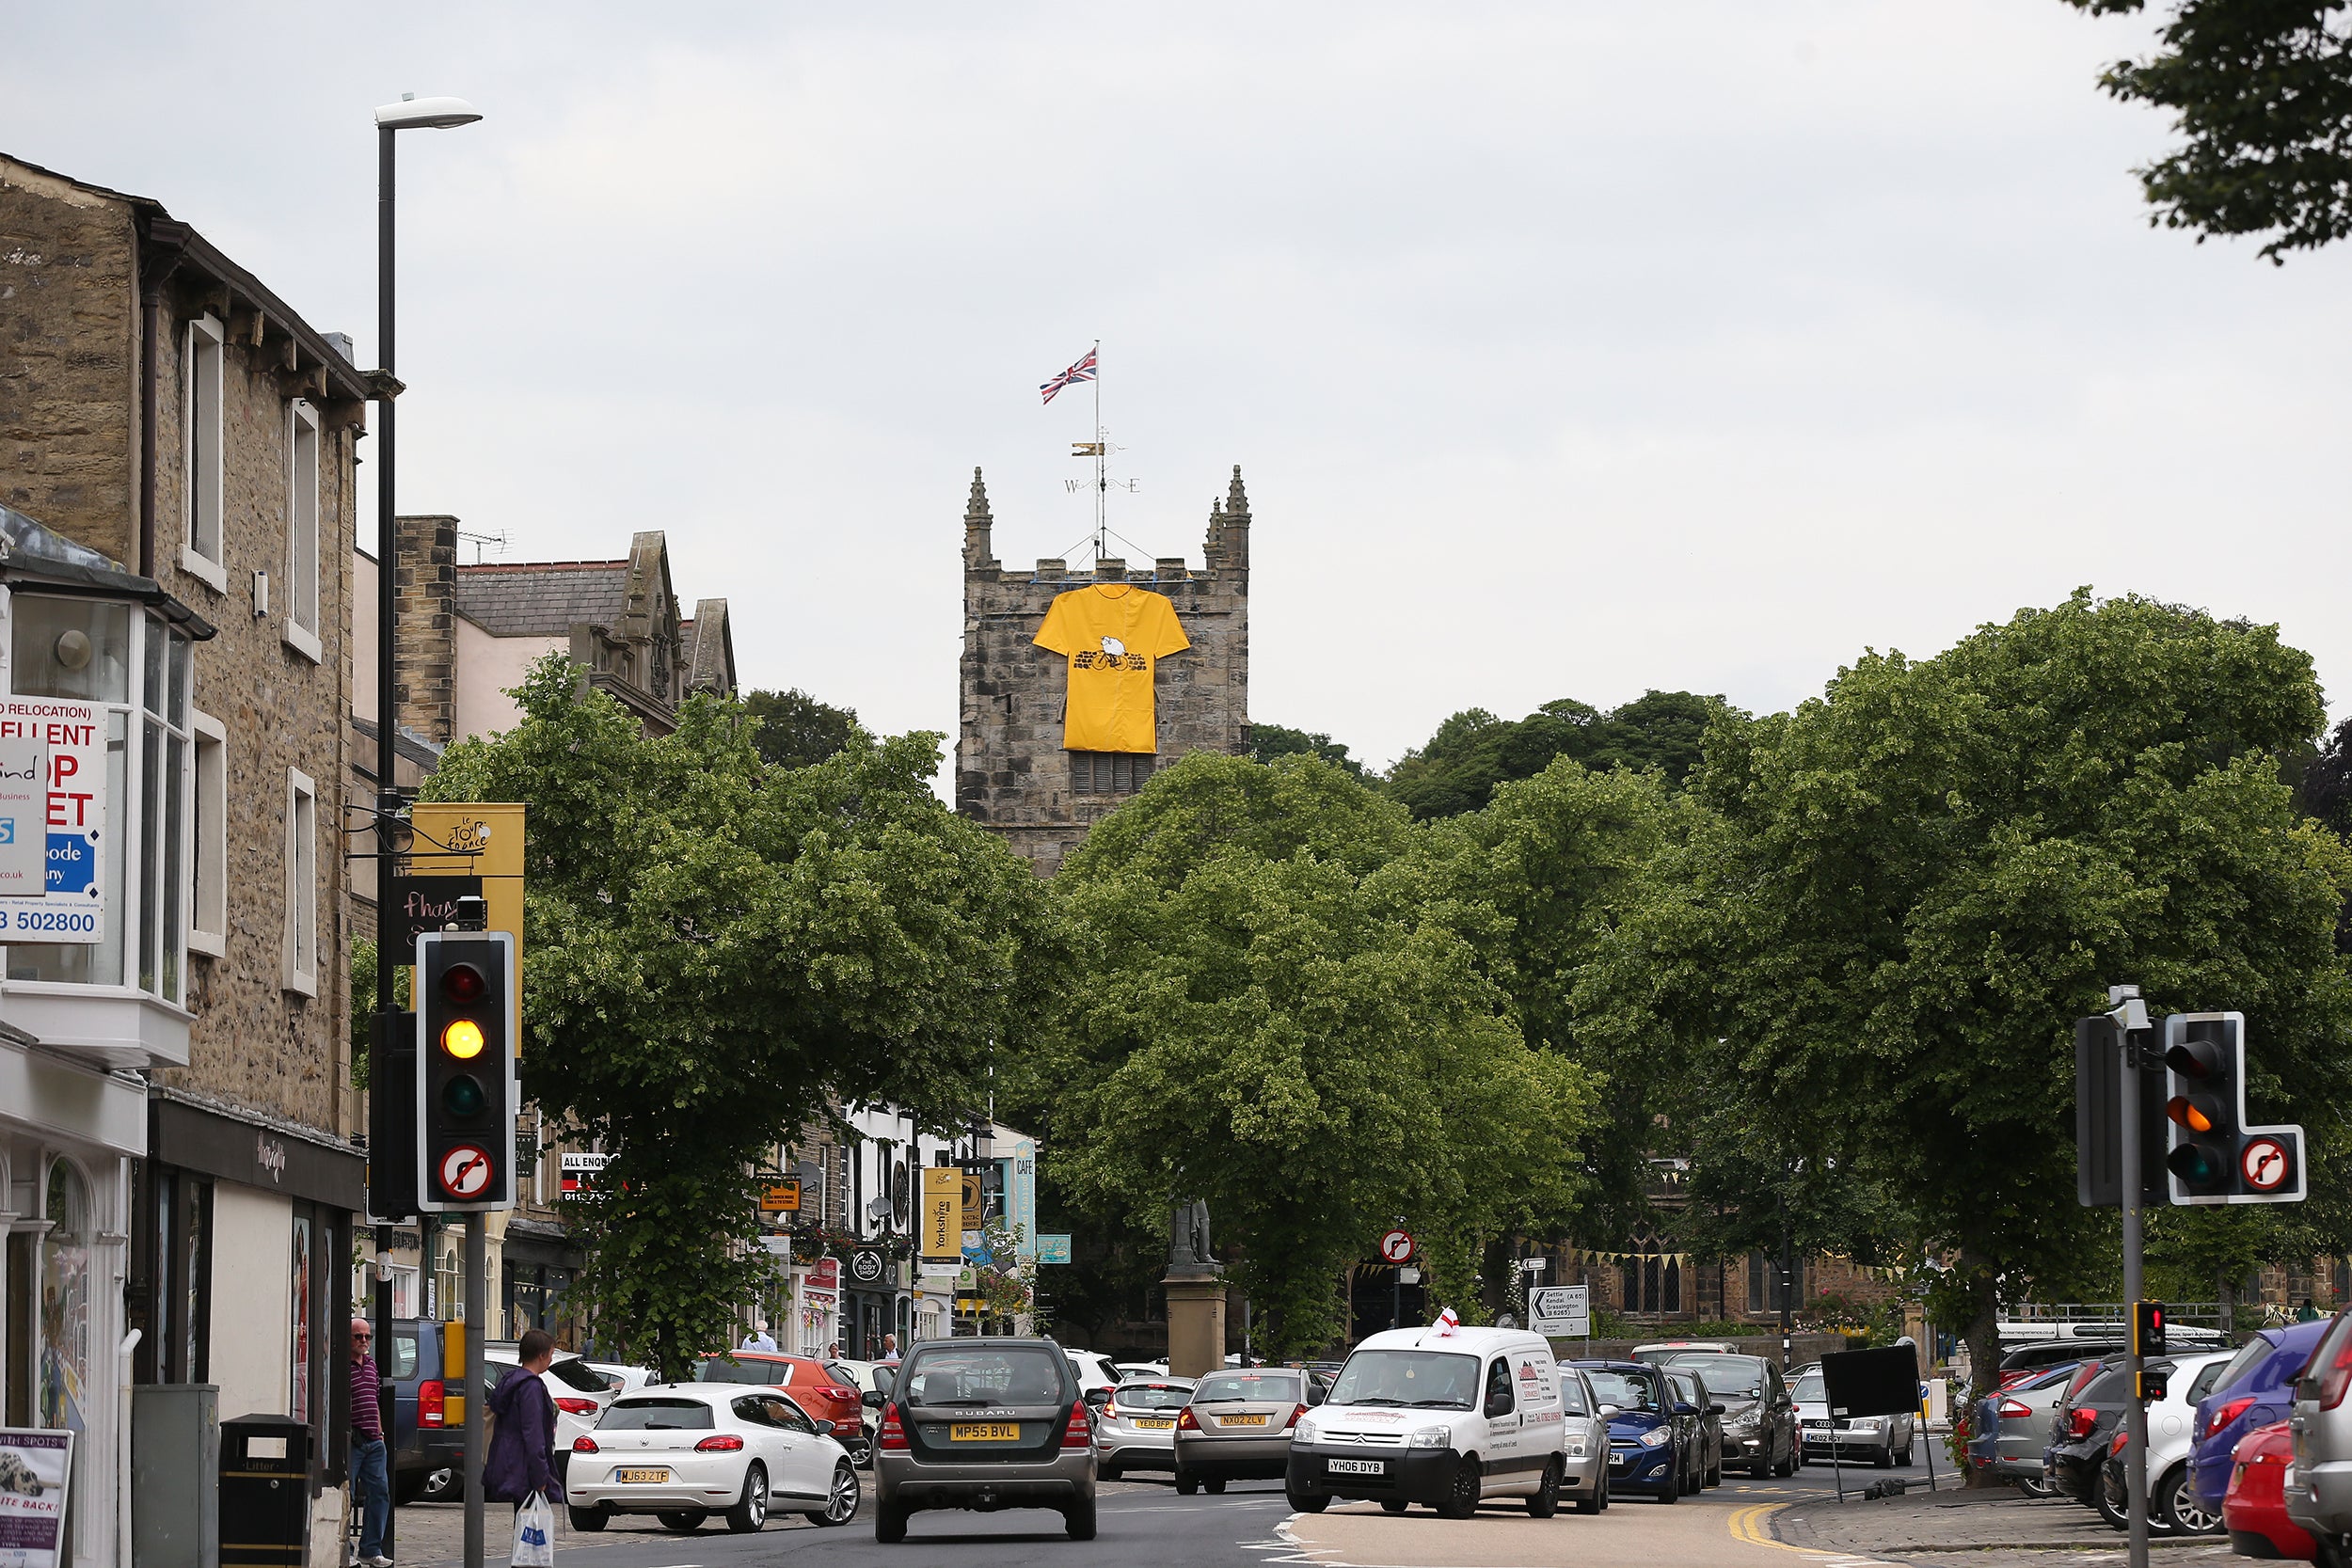 Skipton, in Craven, is a tourist attraction and local commercial hub